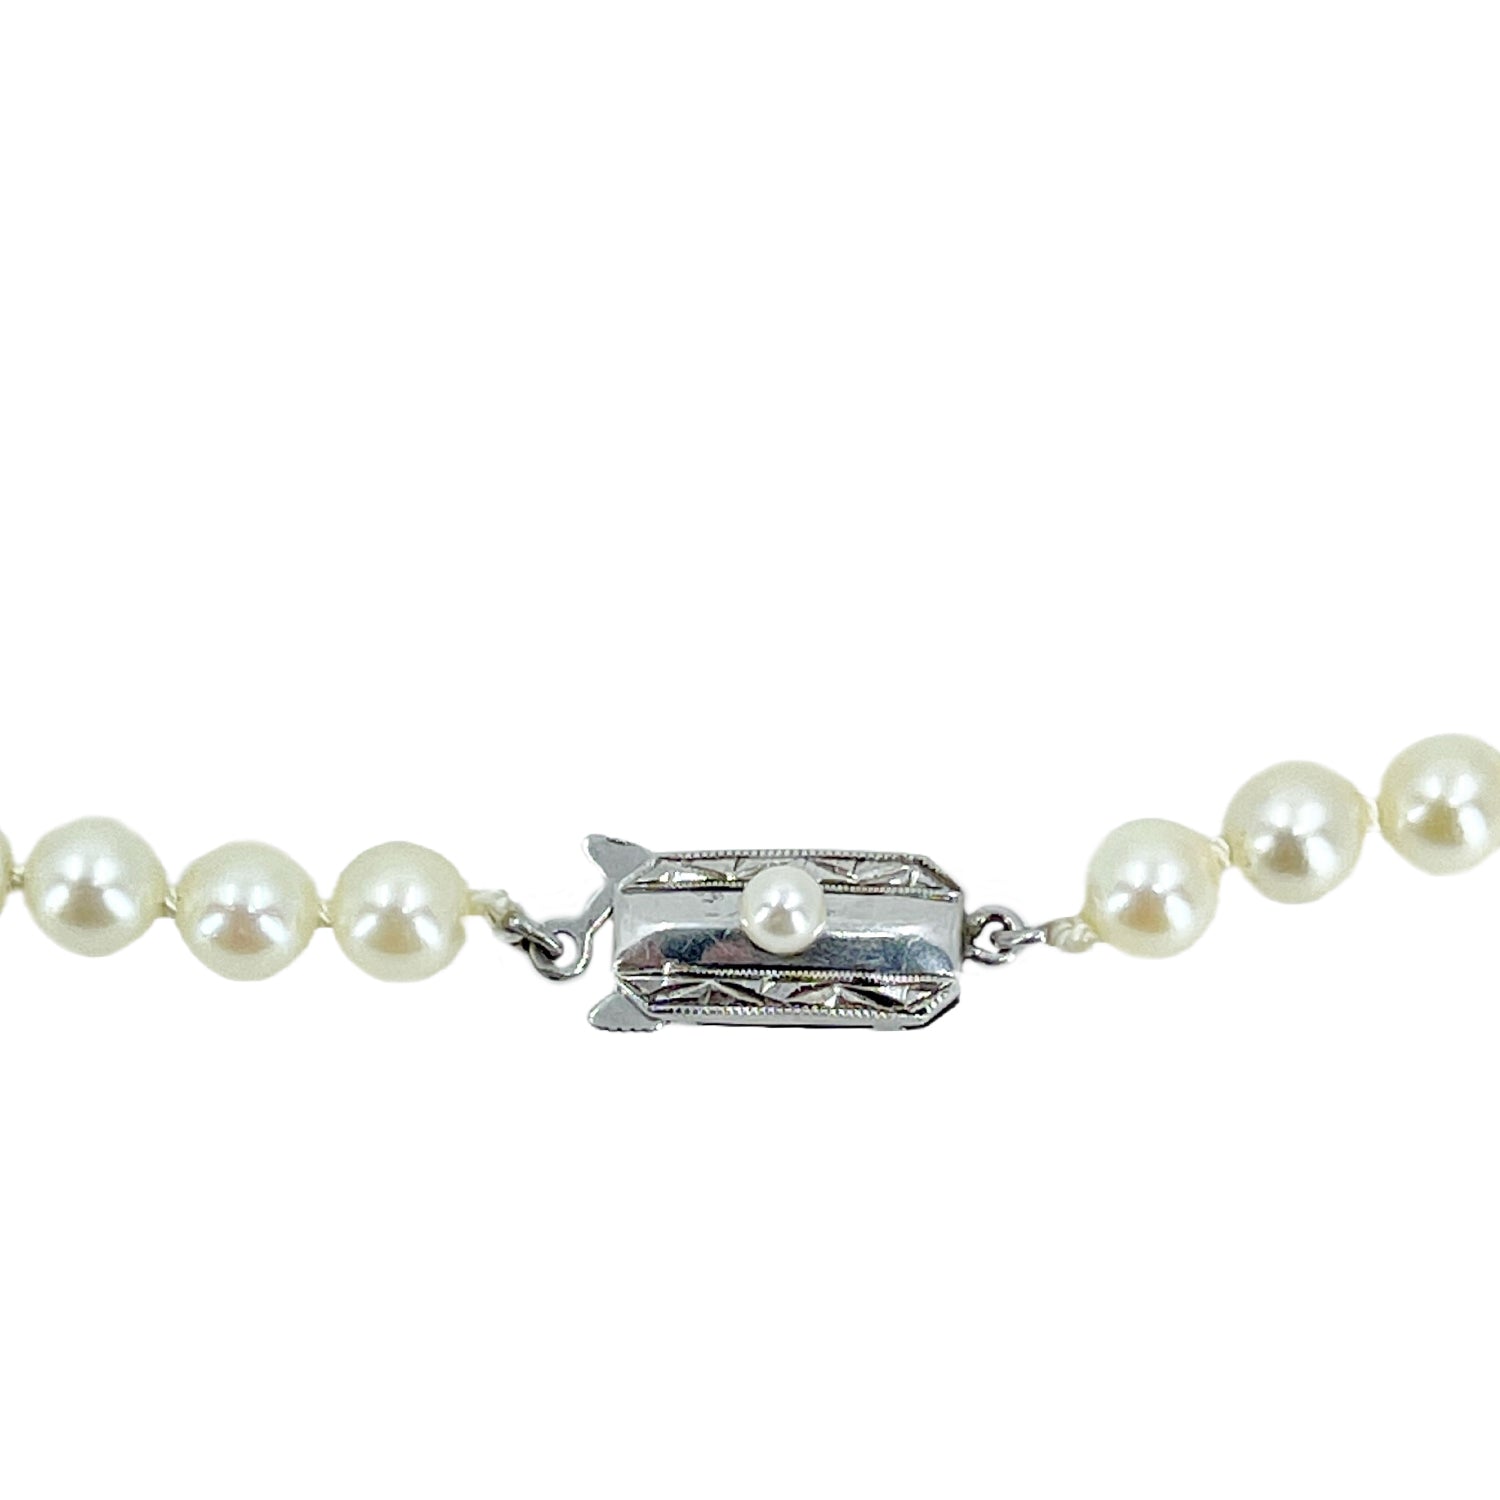 Petite Deco Japanese Saltwater Cultured Akoya Pearl Vintage Choker Necklace - Sterling Silver 16.25 Inch